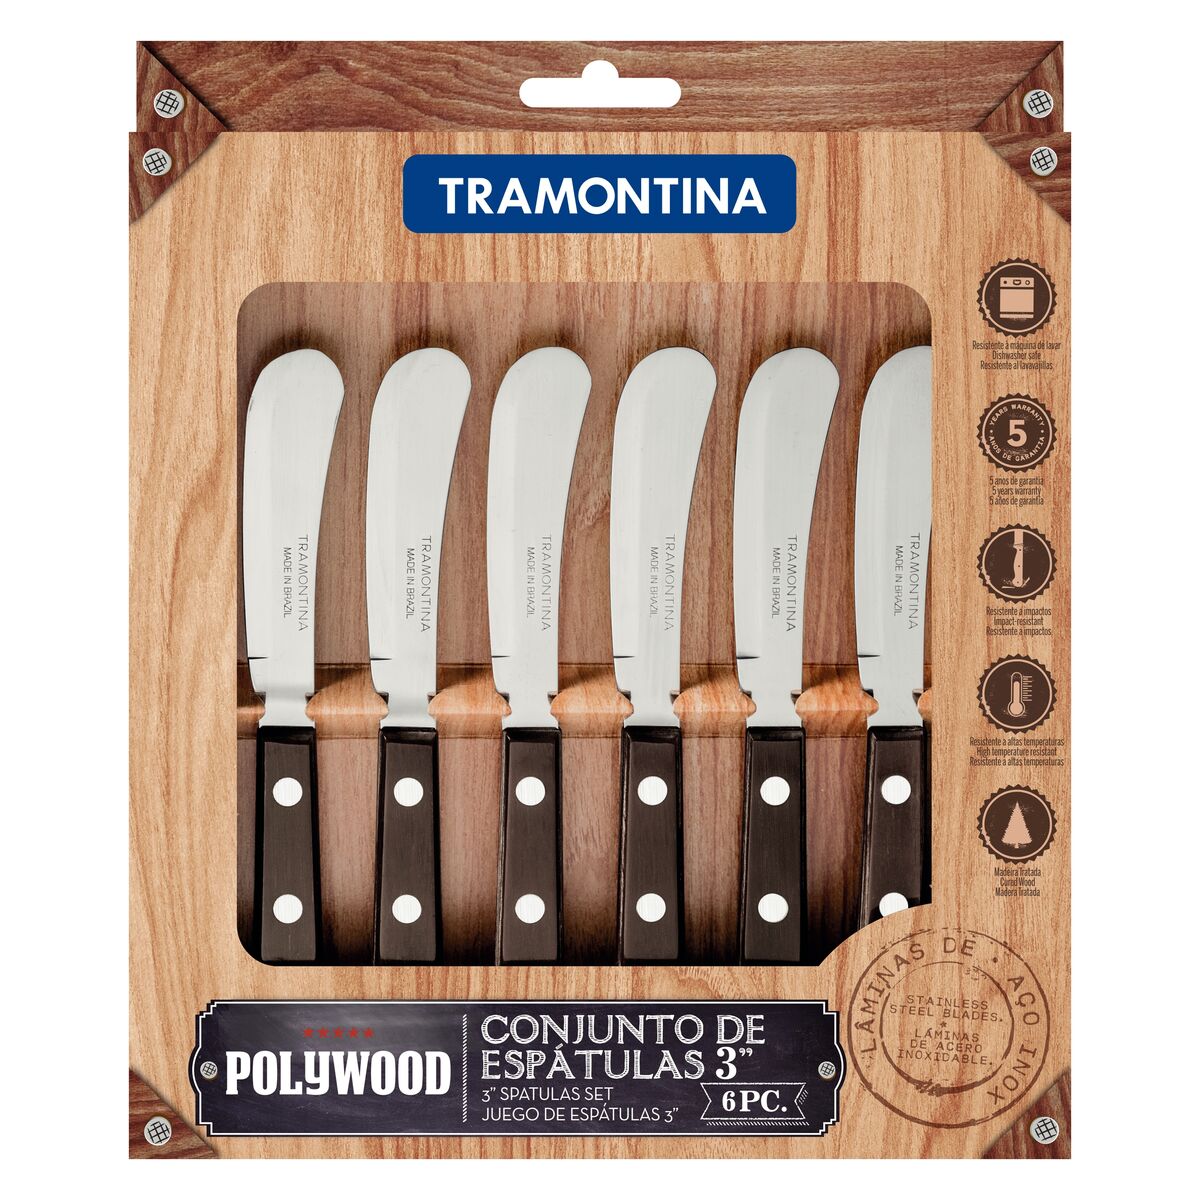 Polywood Butter Spreader Tramontina 6 Pc 